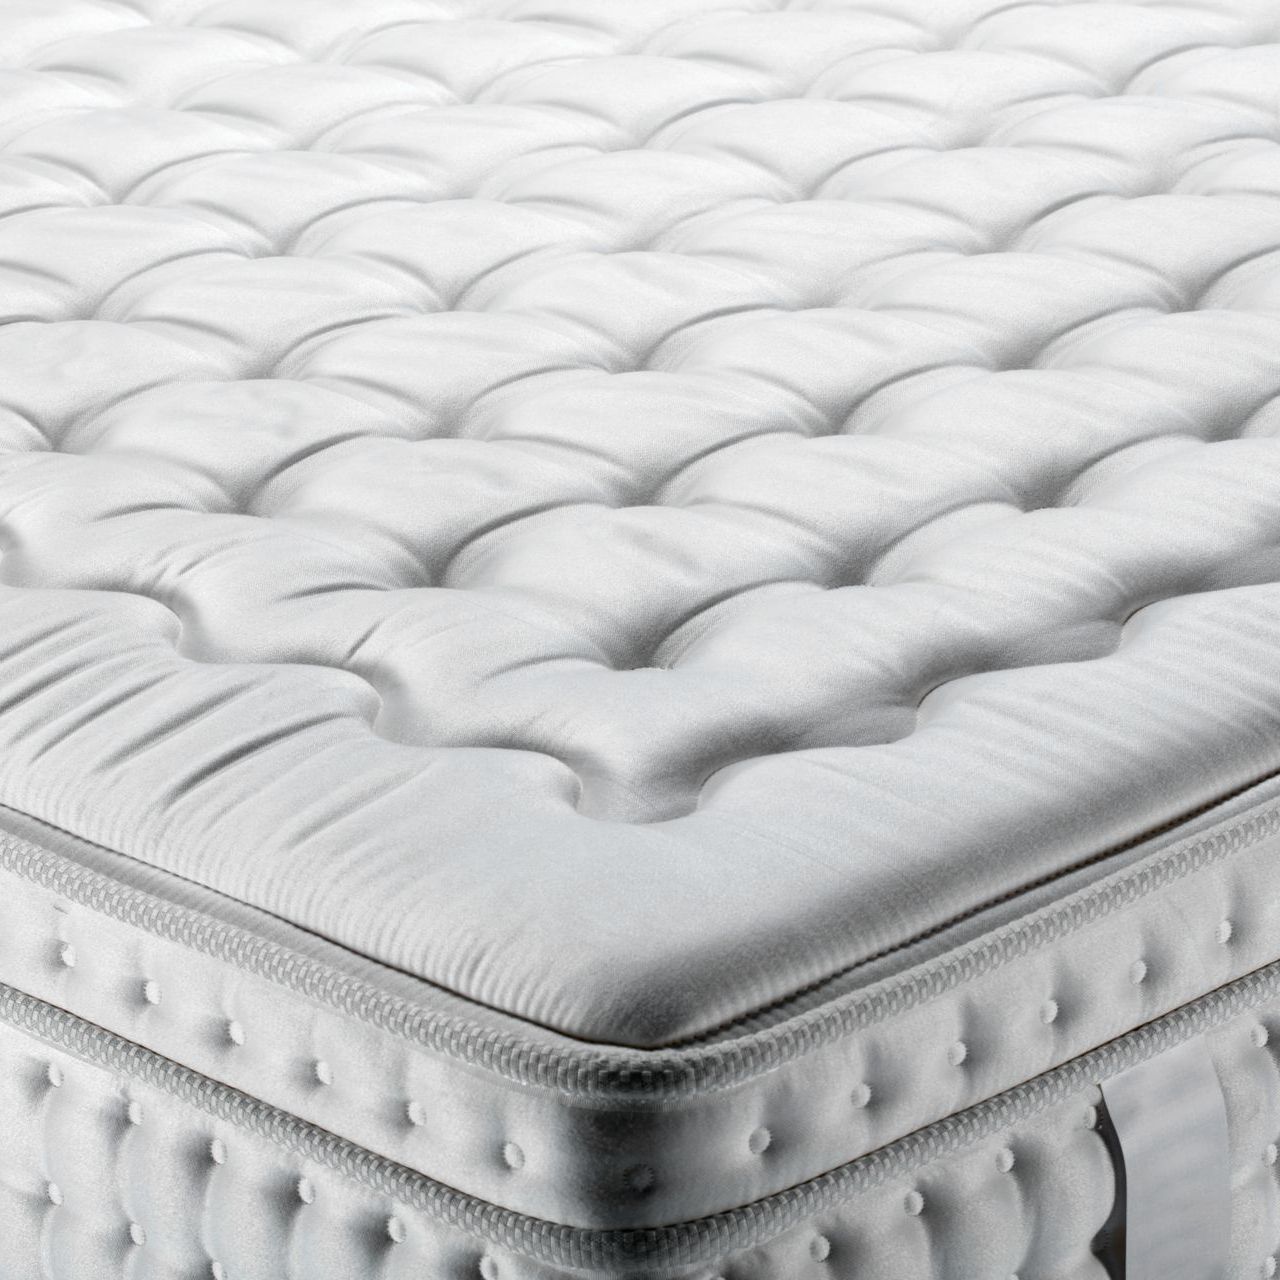 InnerSpring Mattresses for sale: Reflection Collection at Spokane, WA mattress store